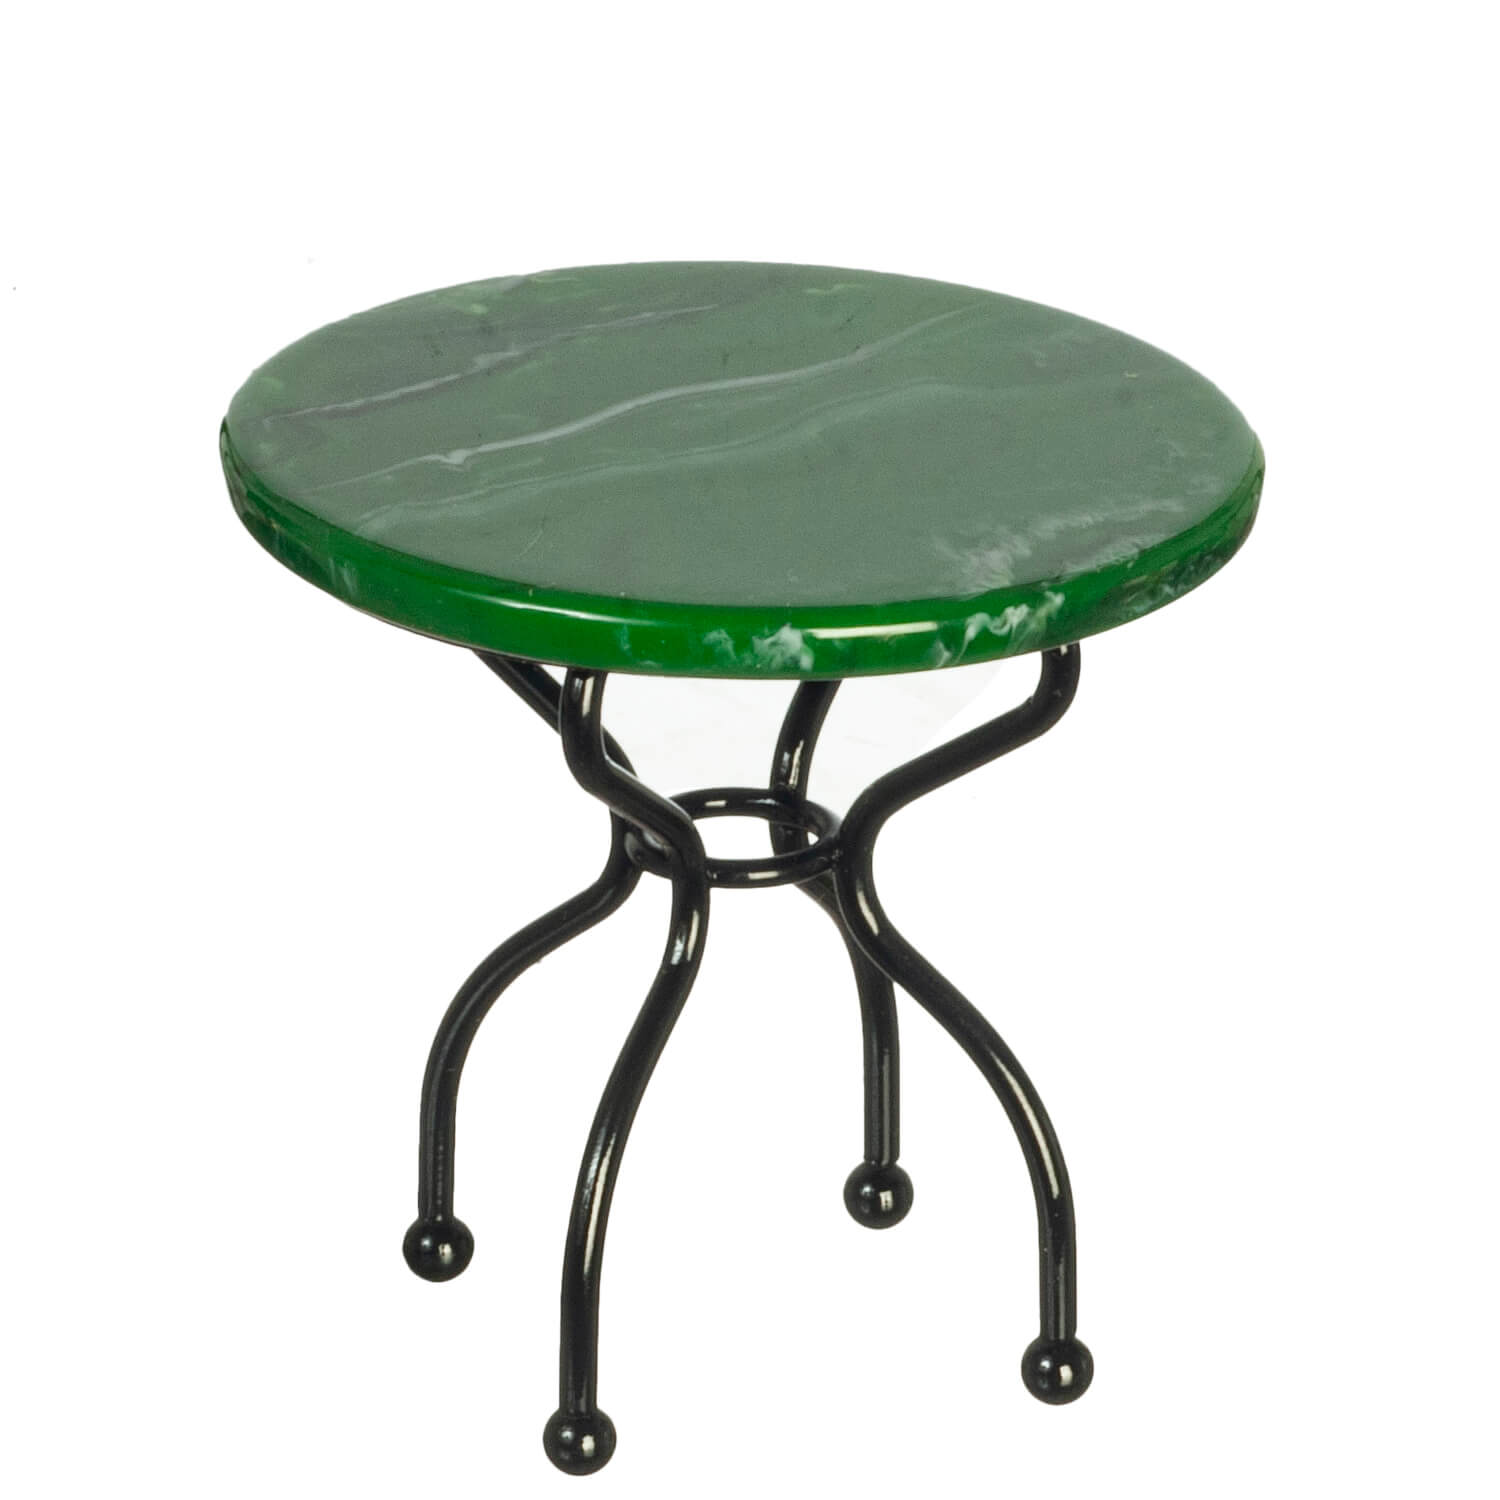 Green Marble Top Patio Table - Black